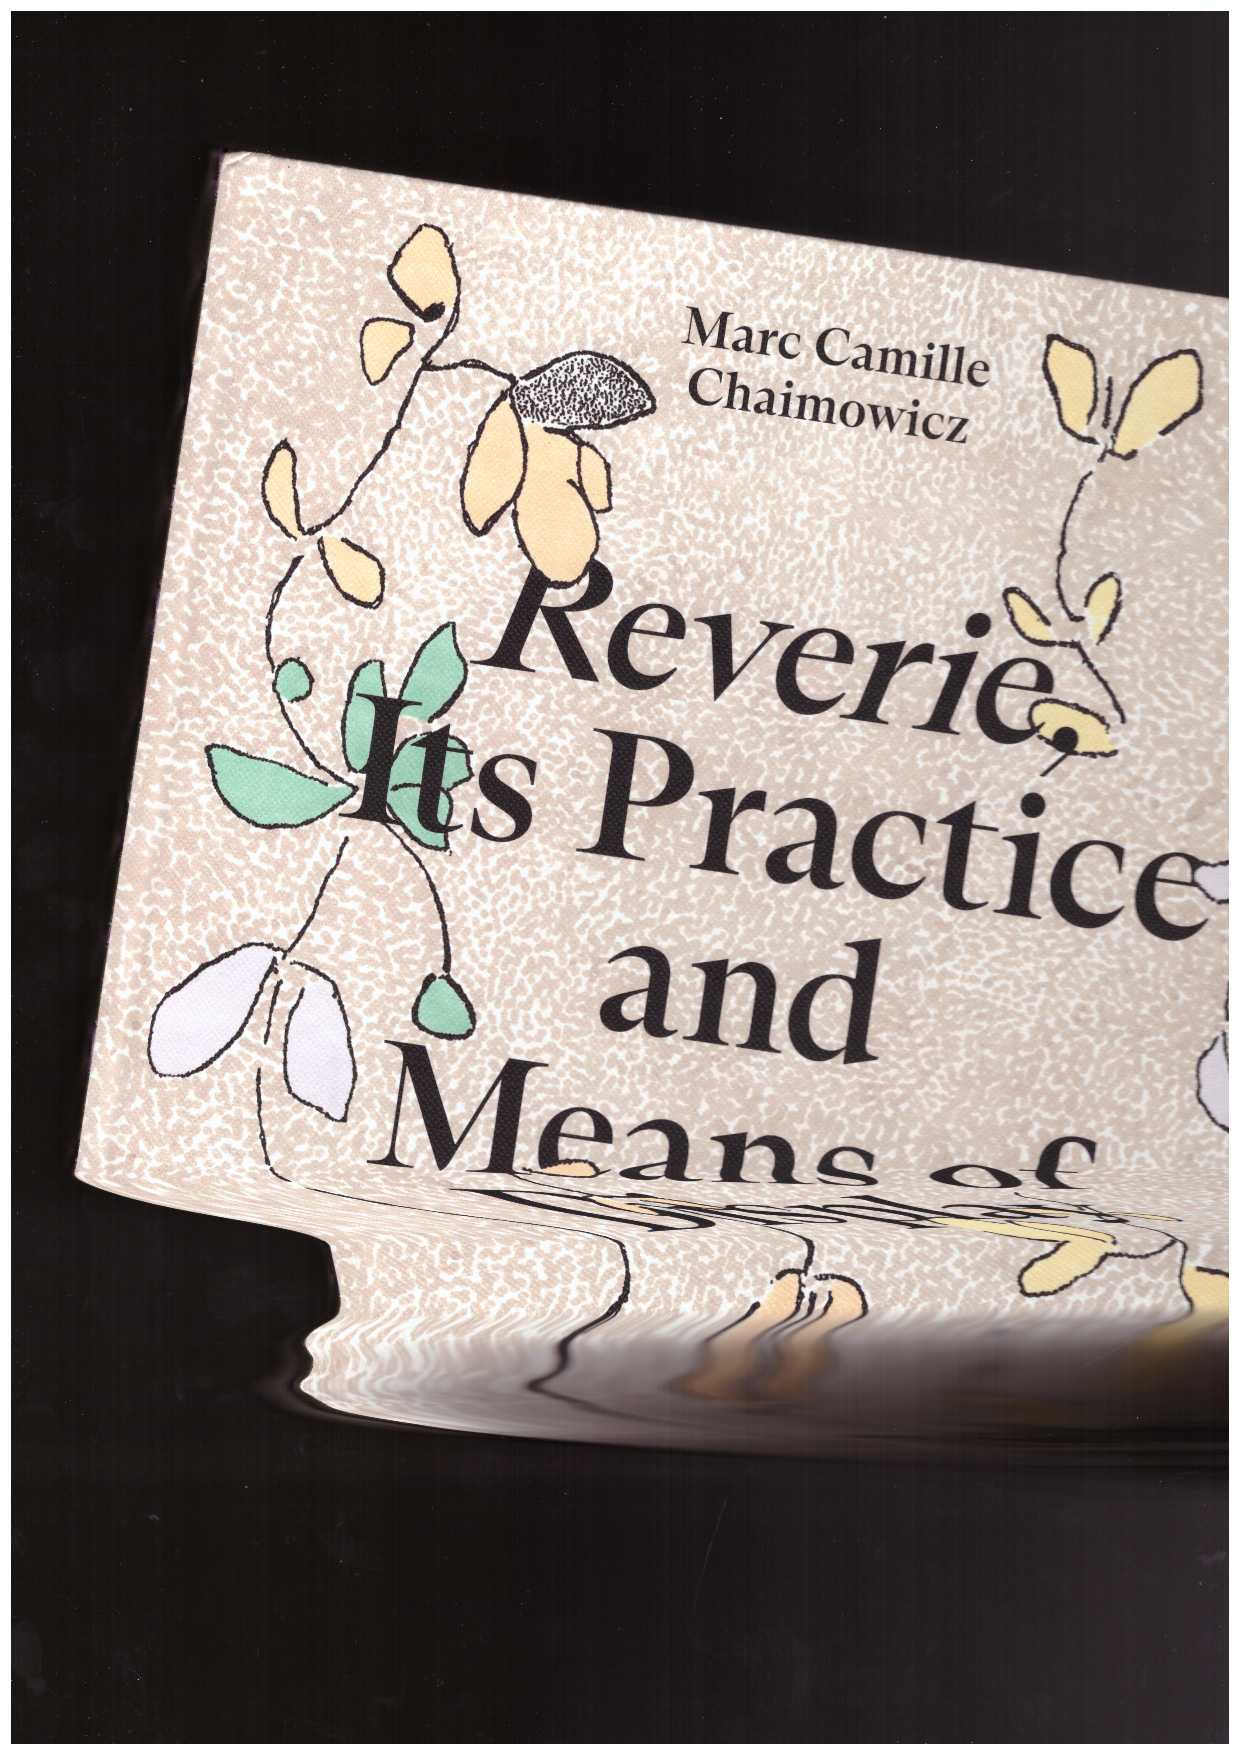 CHAIMOWICZ, Marc Camille - Marc Camille Chaimowicz. Reverie, Its Practice and Means of Display